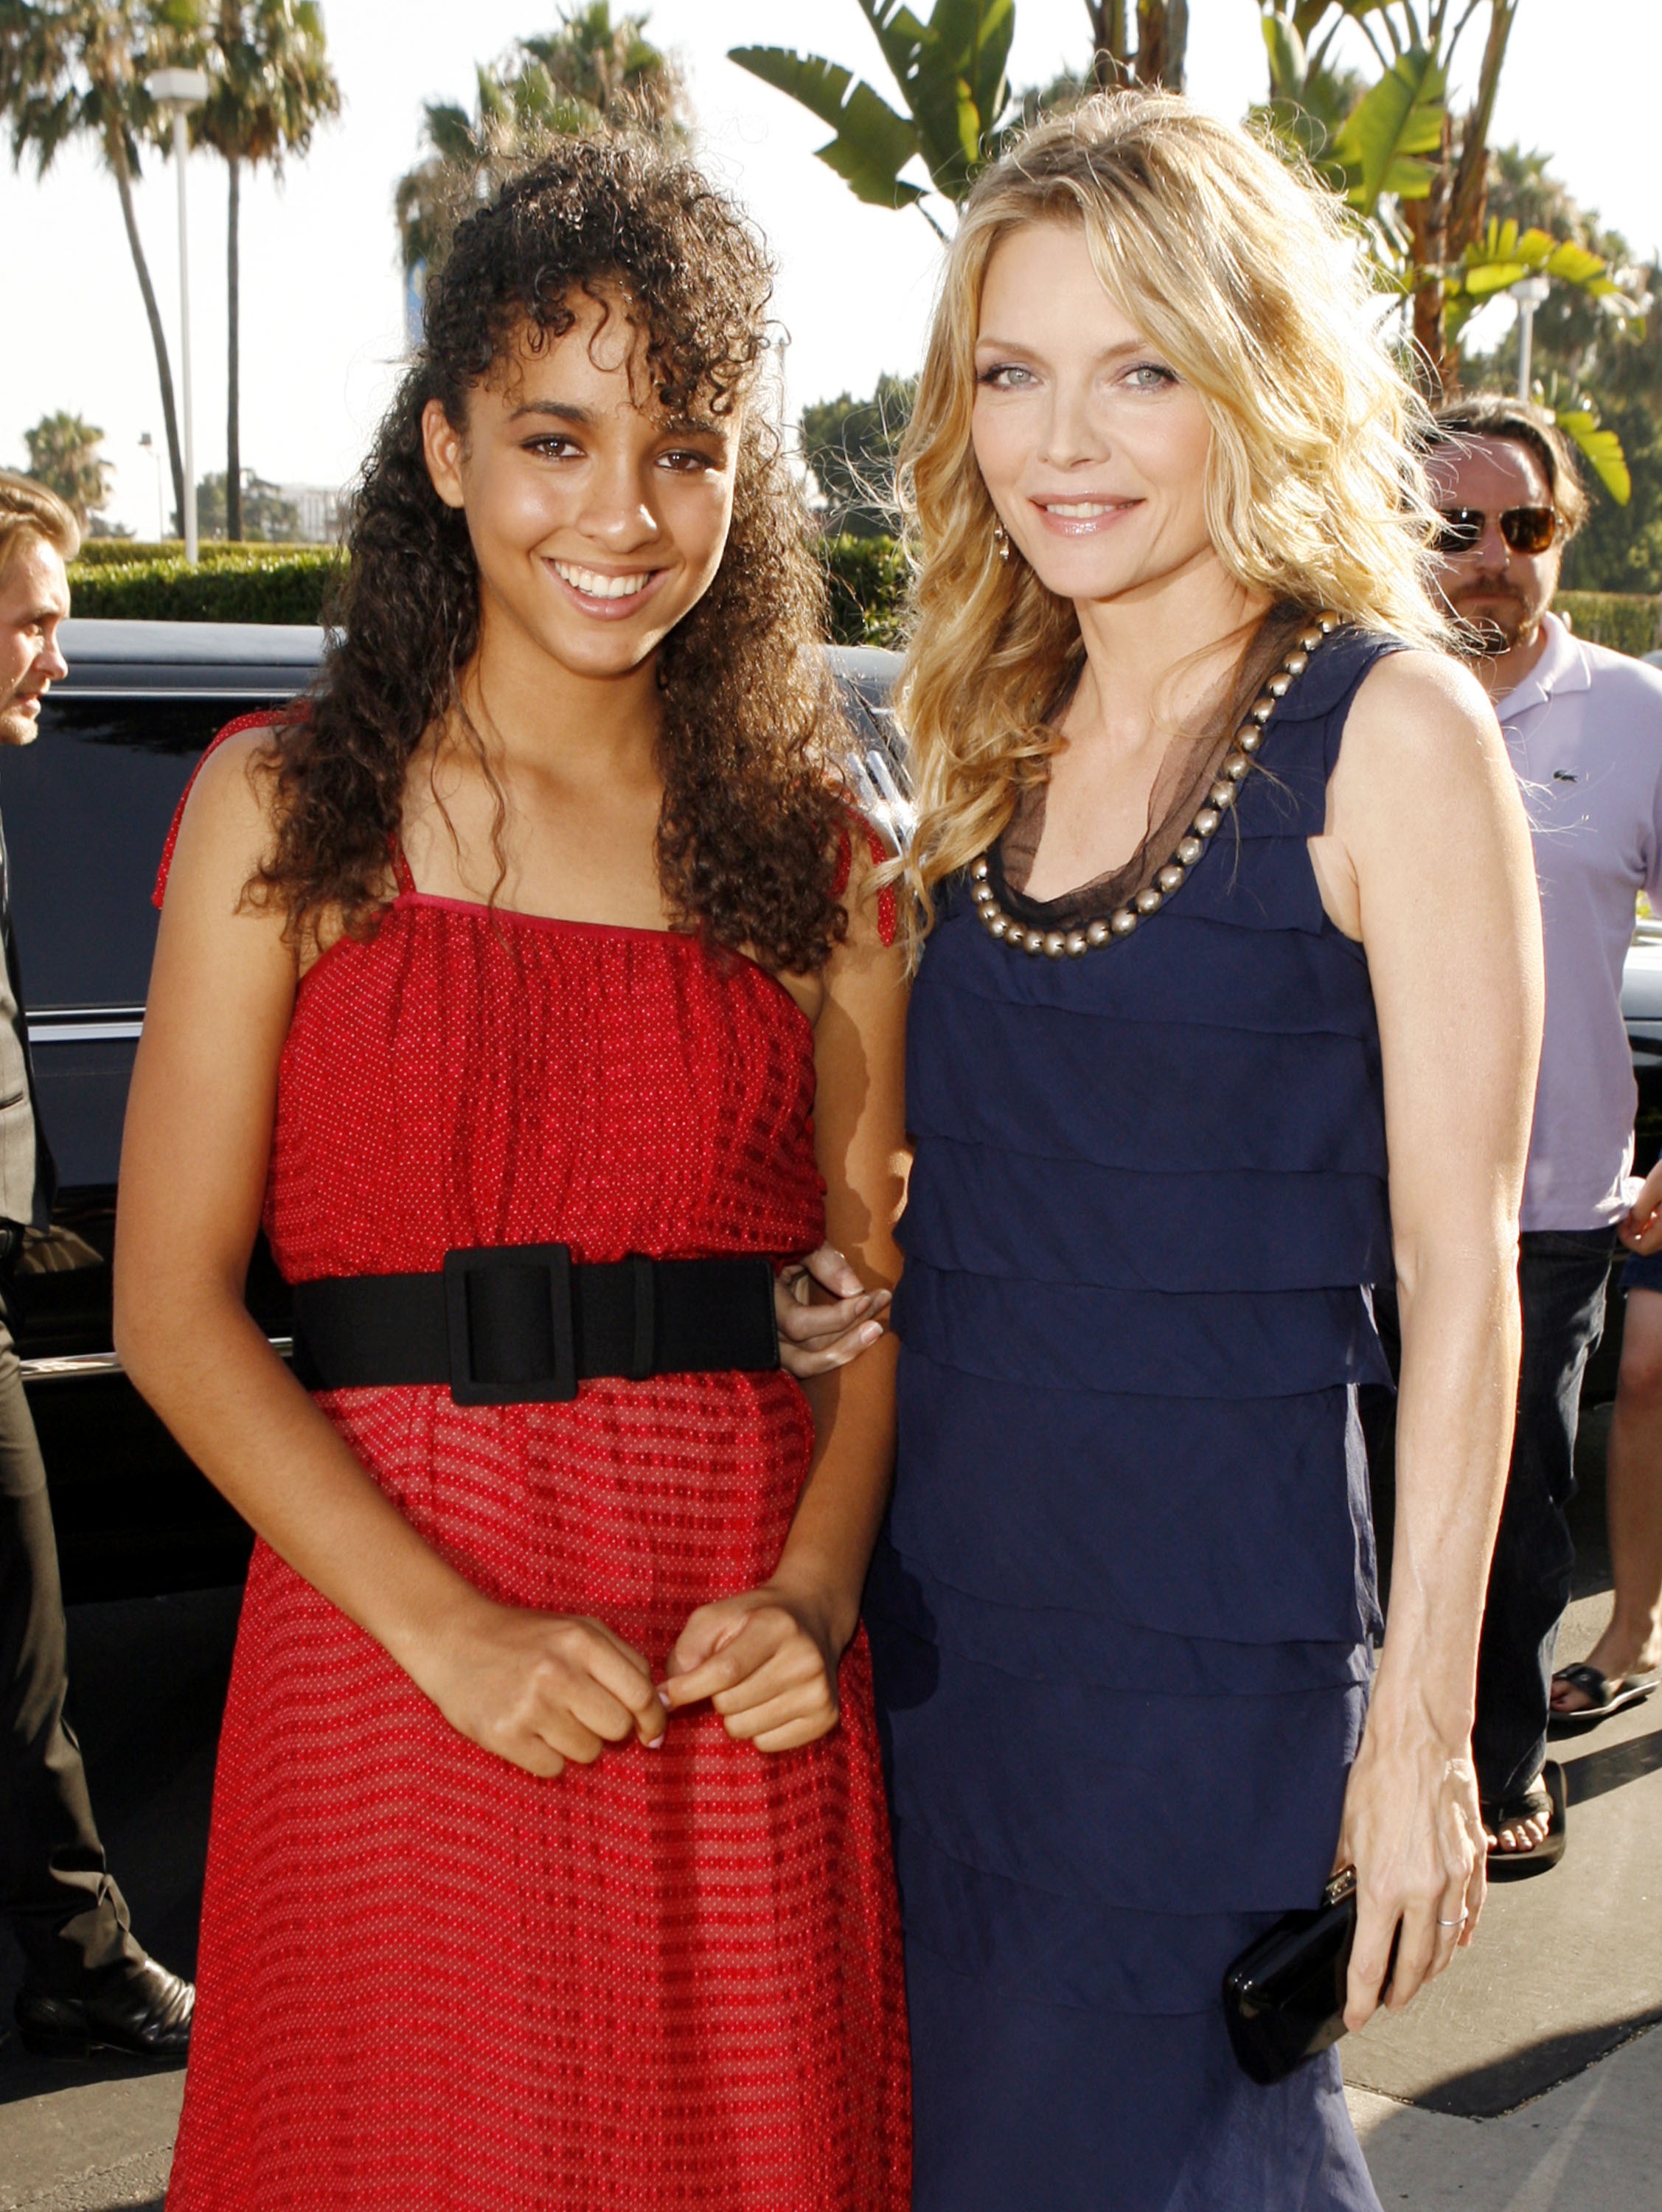 Michelle Pfeiffer and her daughter Claudia at the premiere of "Stardust" on July 29, 2007, in Los Angeles, California | Source: Getty Images